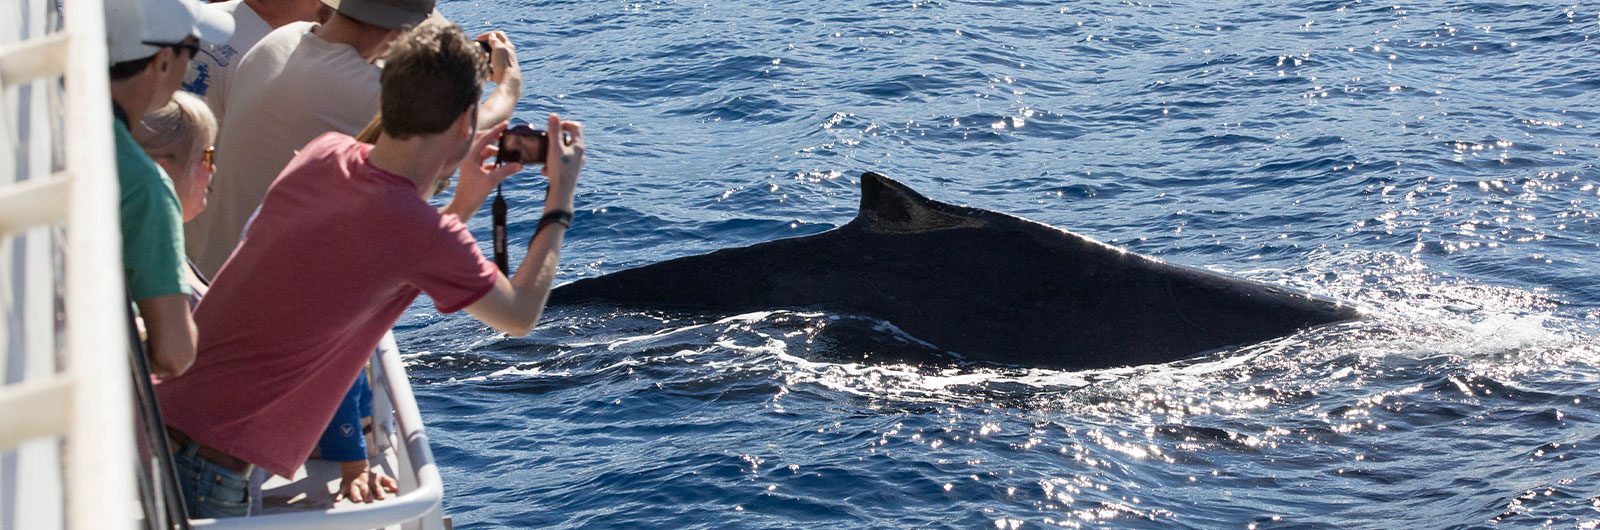 Top 5 Maui Whale Watching Tours